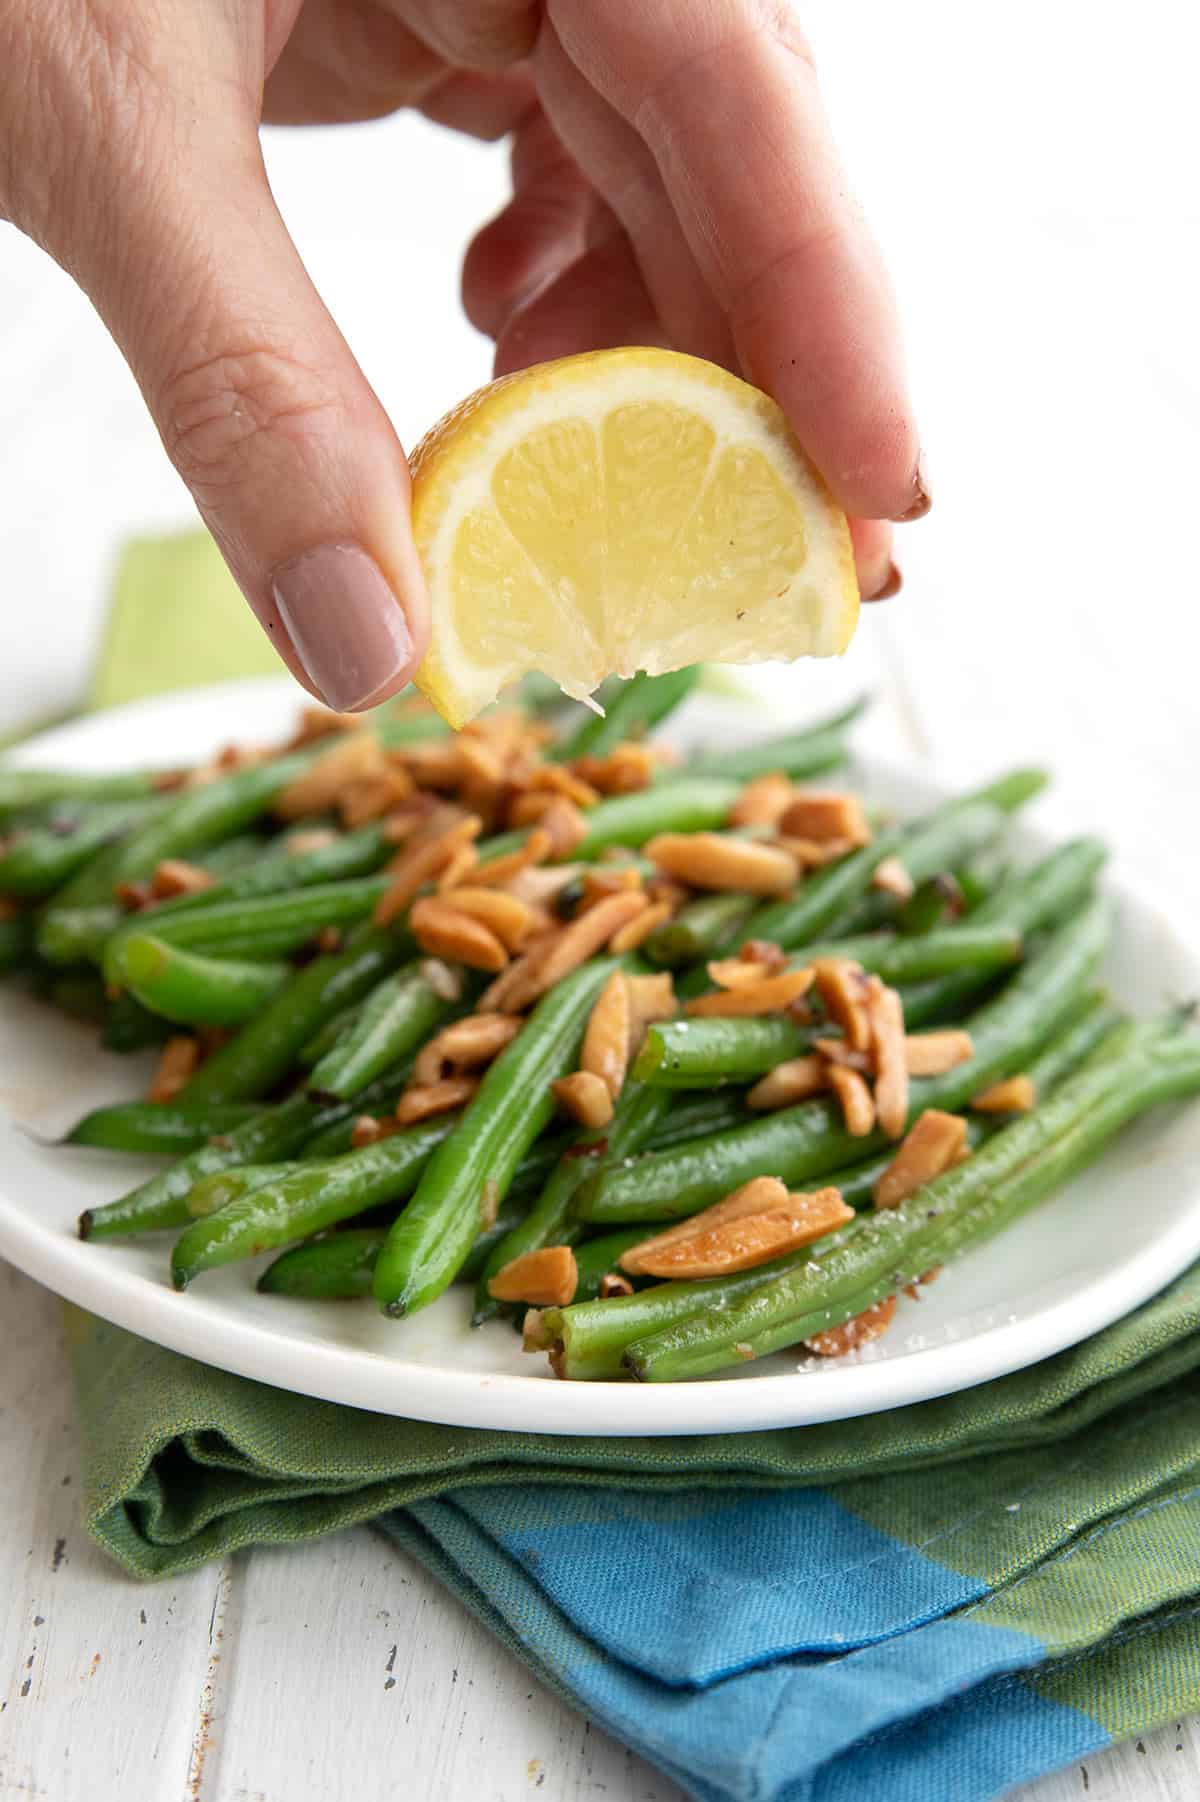 A hand squeezing lemon over Green Beans Amandine.